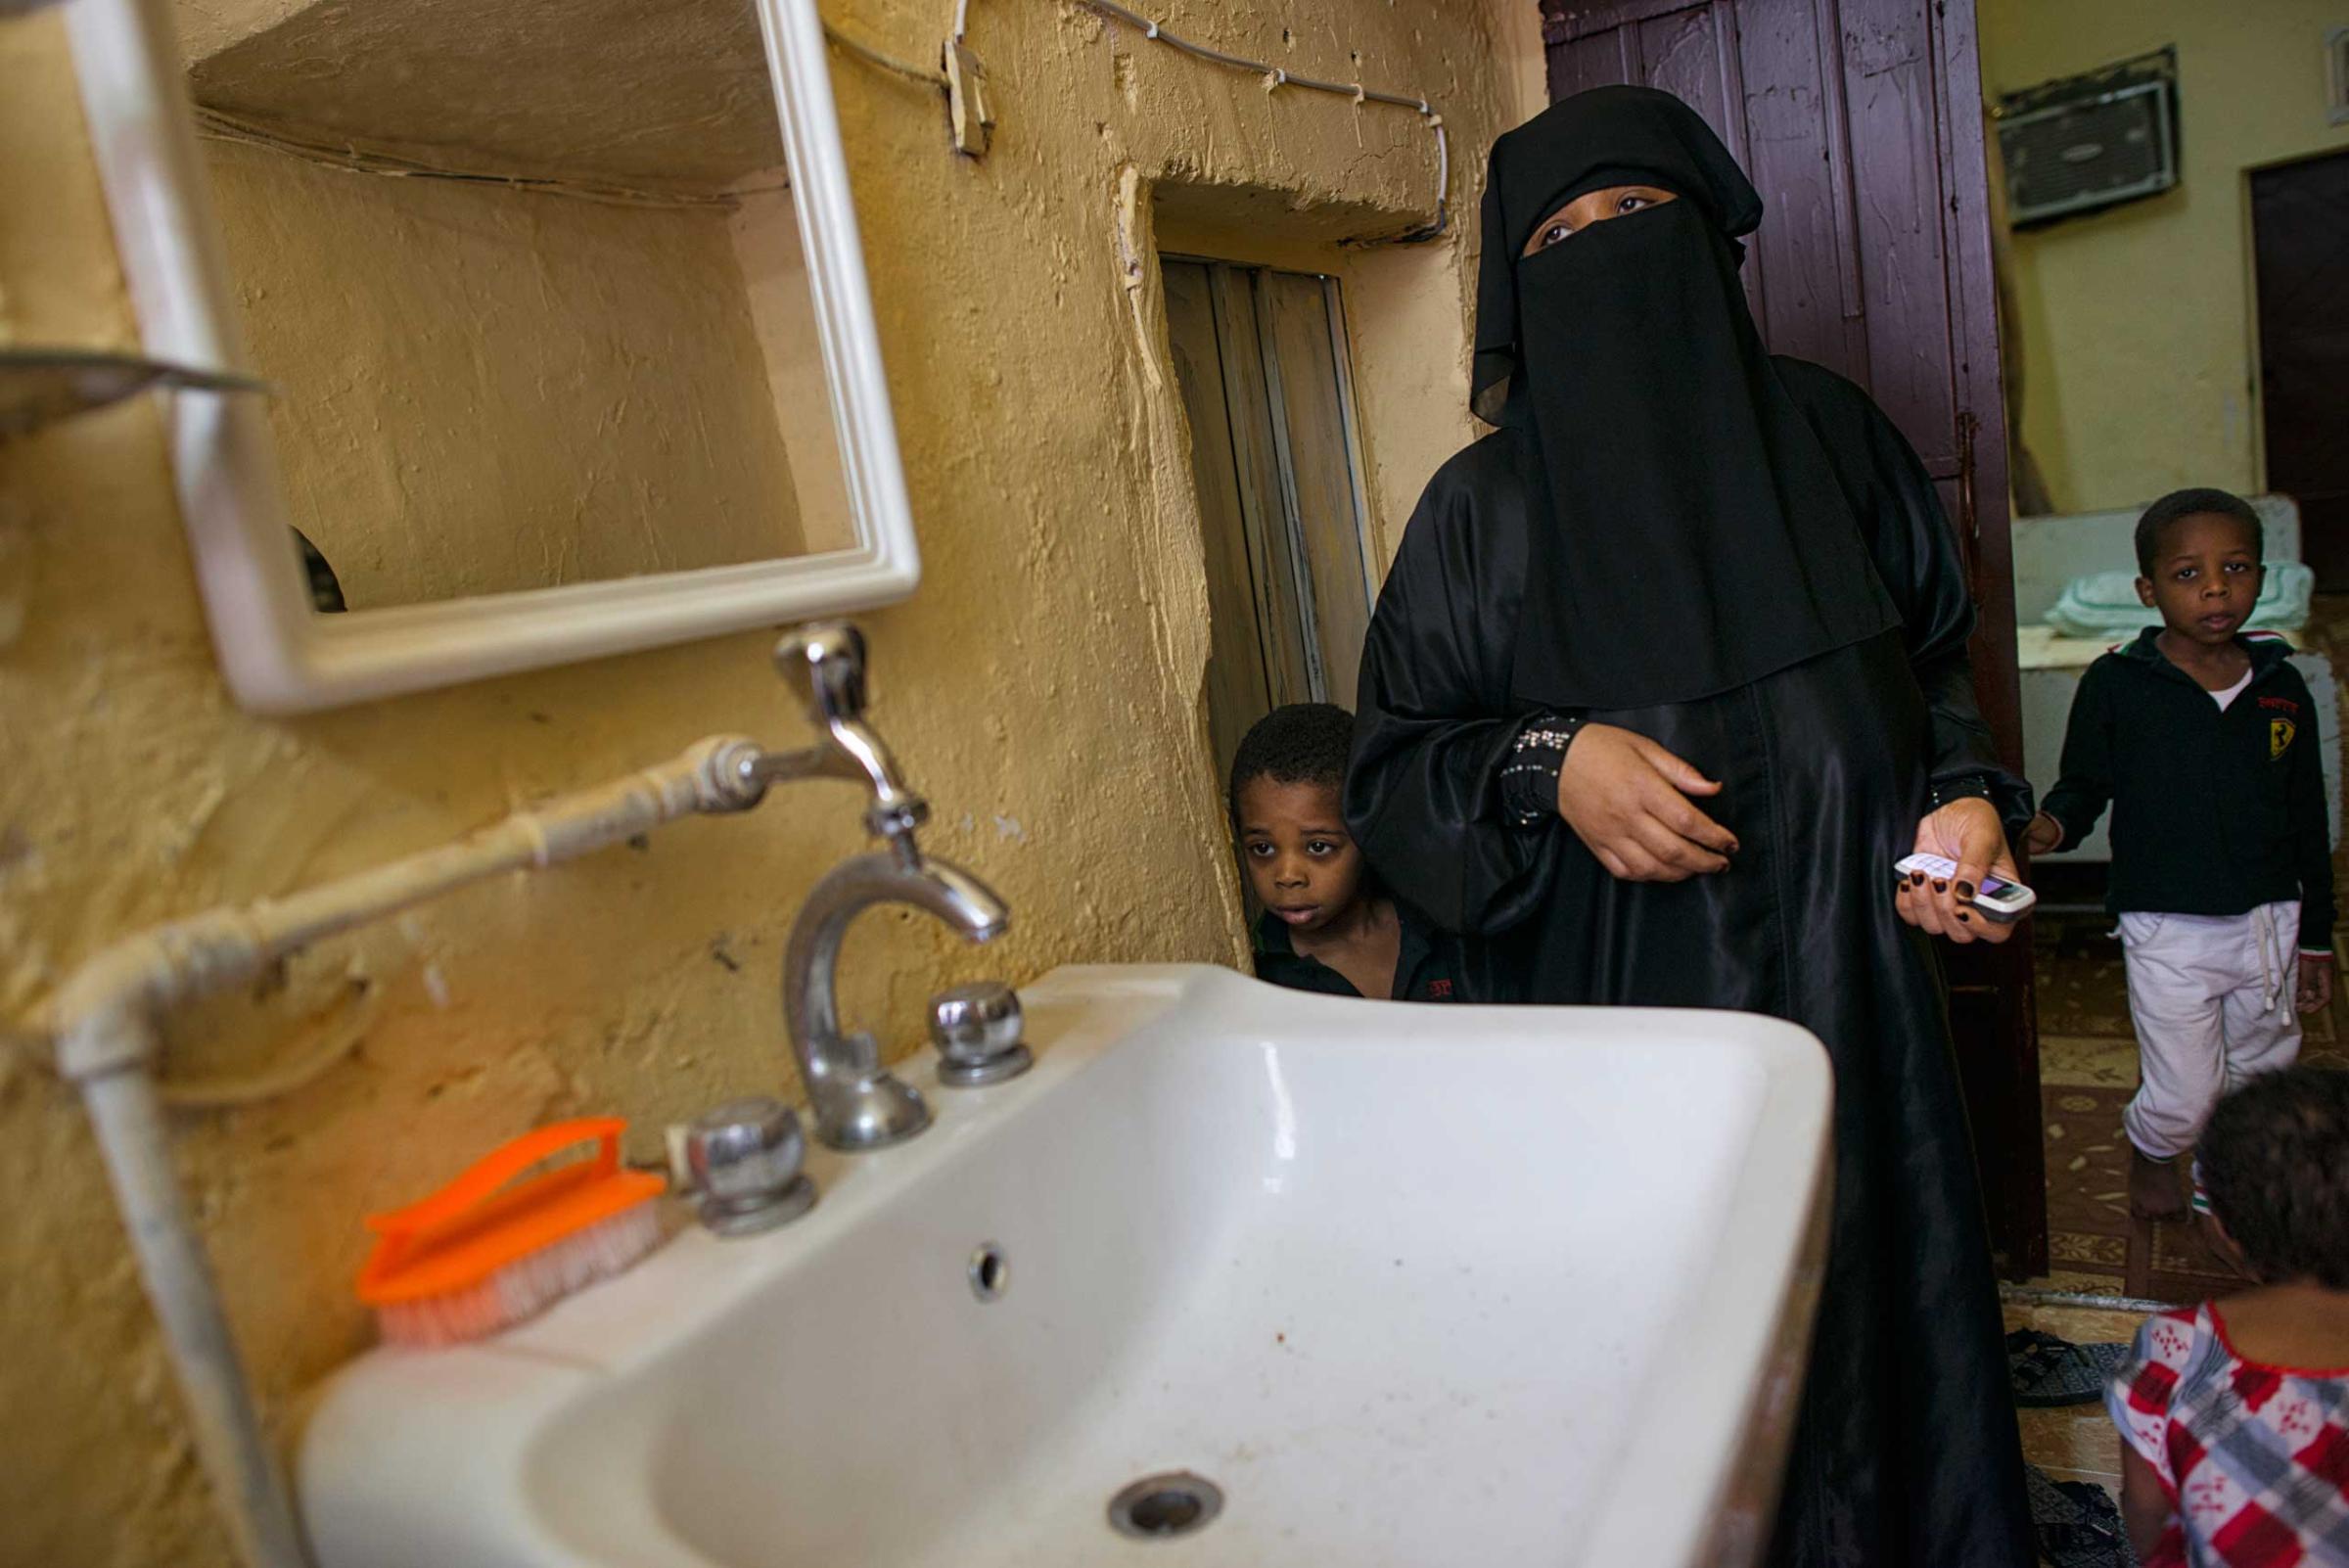 Matara stands with her two boys next to a sink without water, where she lives in squalor in a neighborhood in South Riyadh, Saudi Arabia,  March 1, 2013.   Like many families across Saudi Arabia who are barely scraping above the poverty line each month, this family relies on the hope of the charity of others to survive. (Credit: Lynsey Addario/ VII)